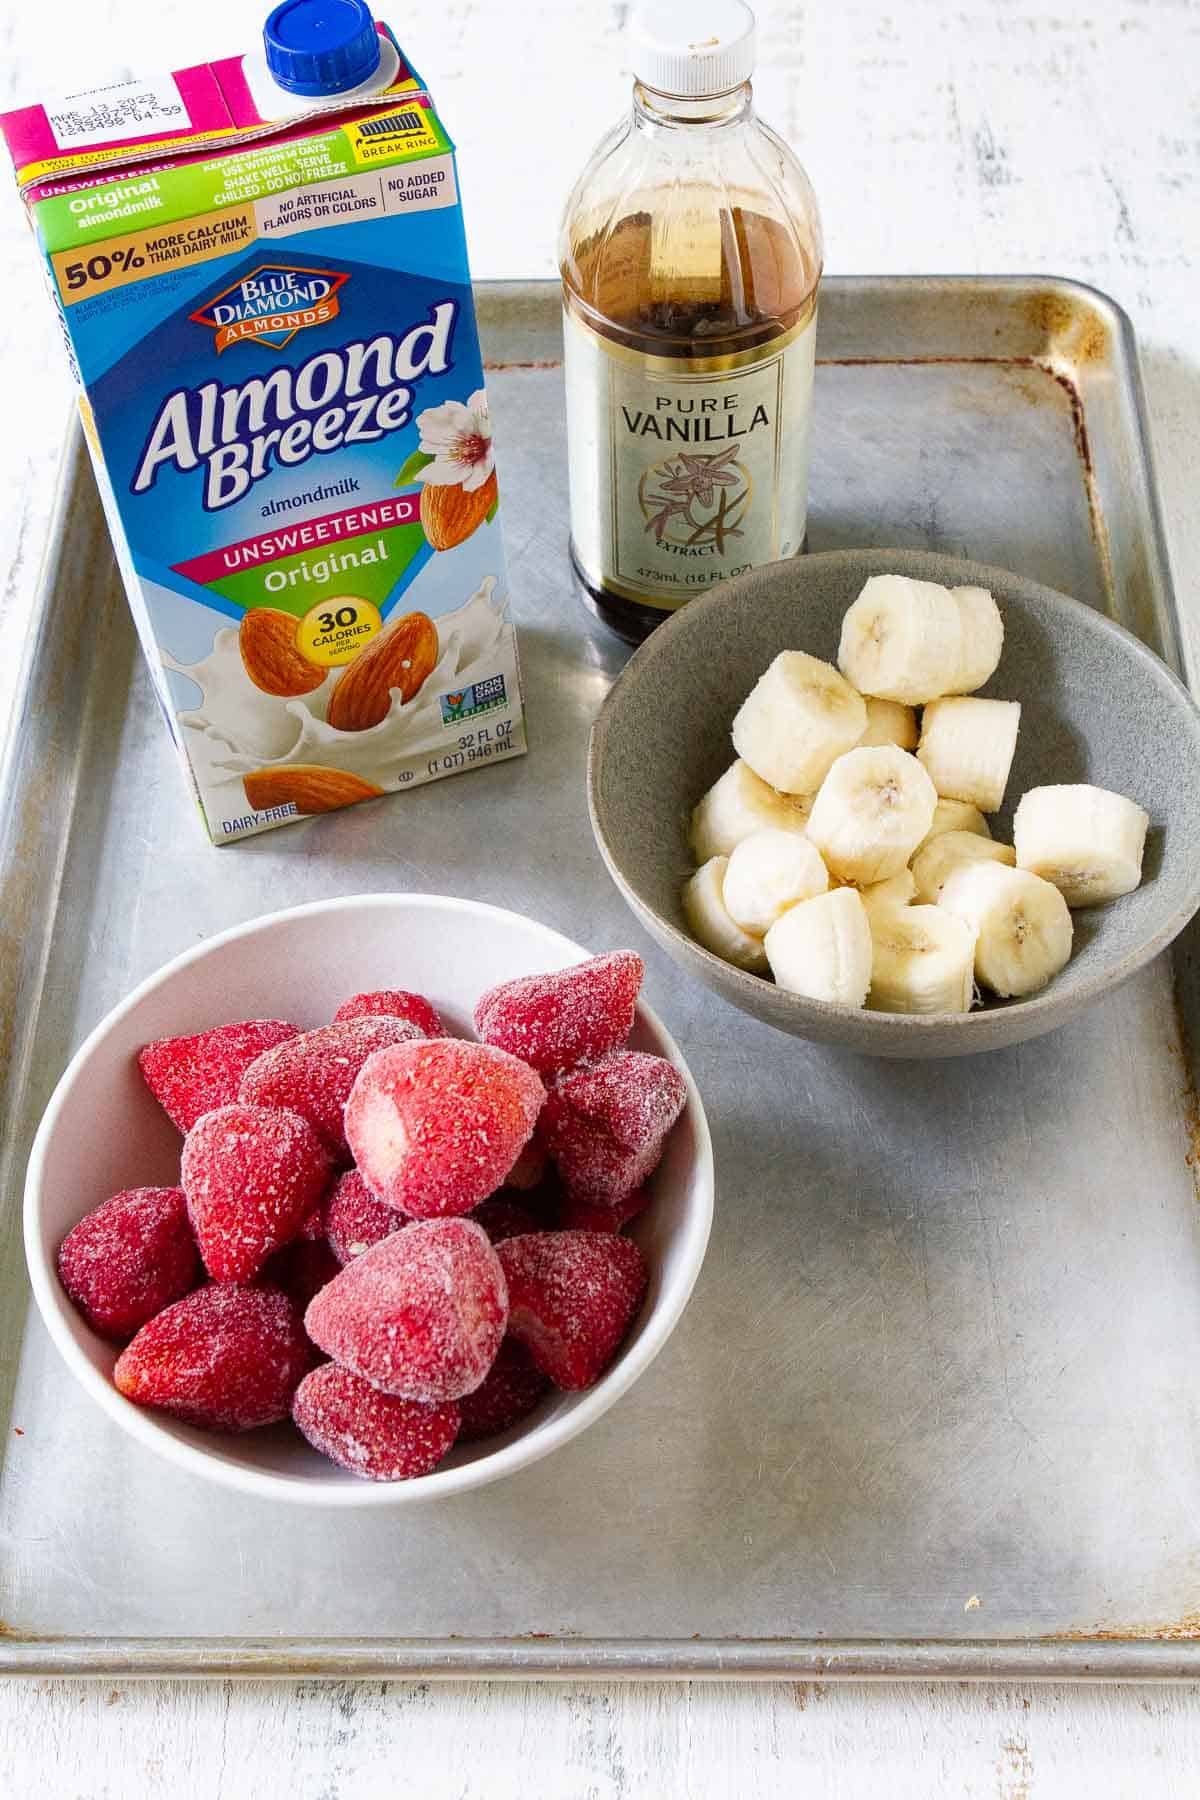 Bowls of strawberries and bananas, vanilla extract and almond milk on a baking sheet.